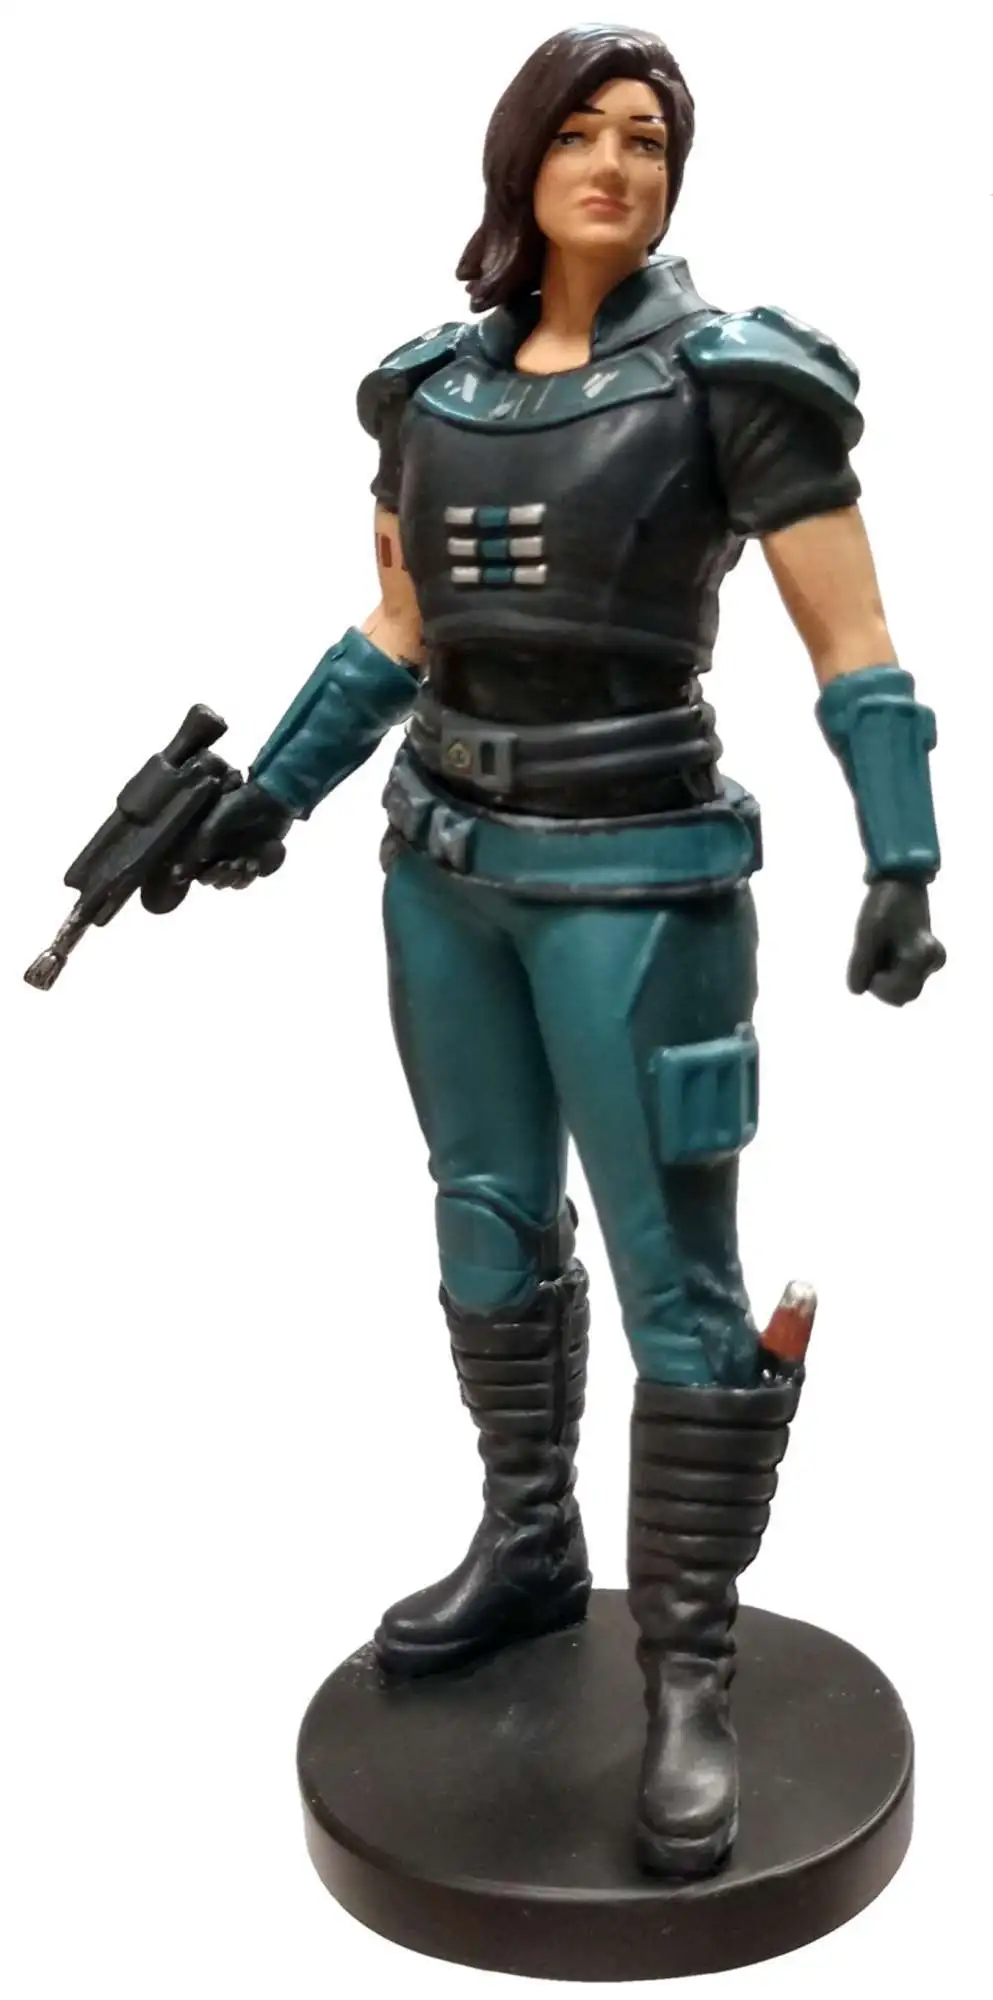 Cara Dune 3.75” Action Figure for sale online F1422 Star Wars: The Mandalorian 